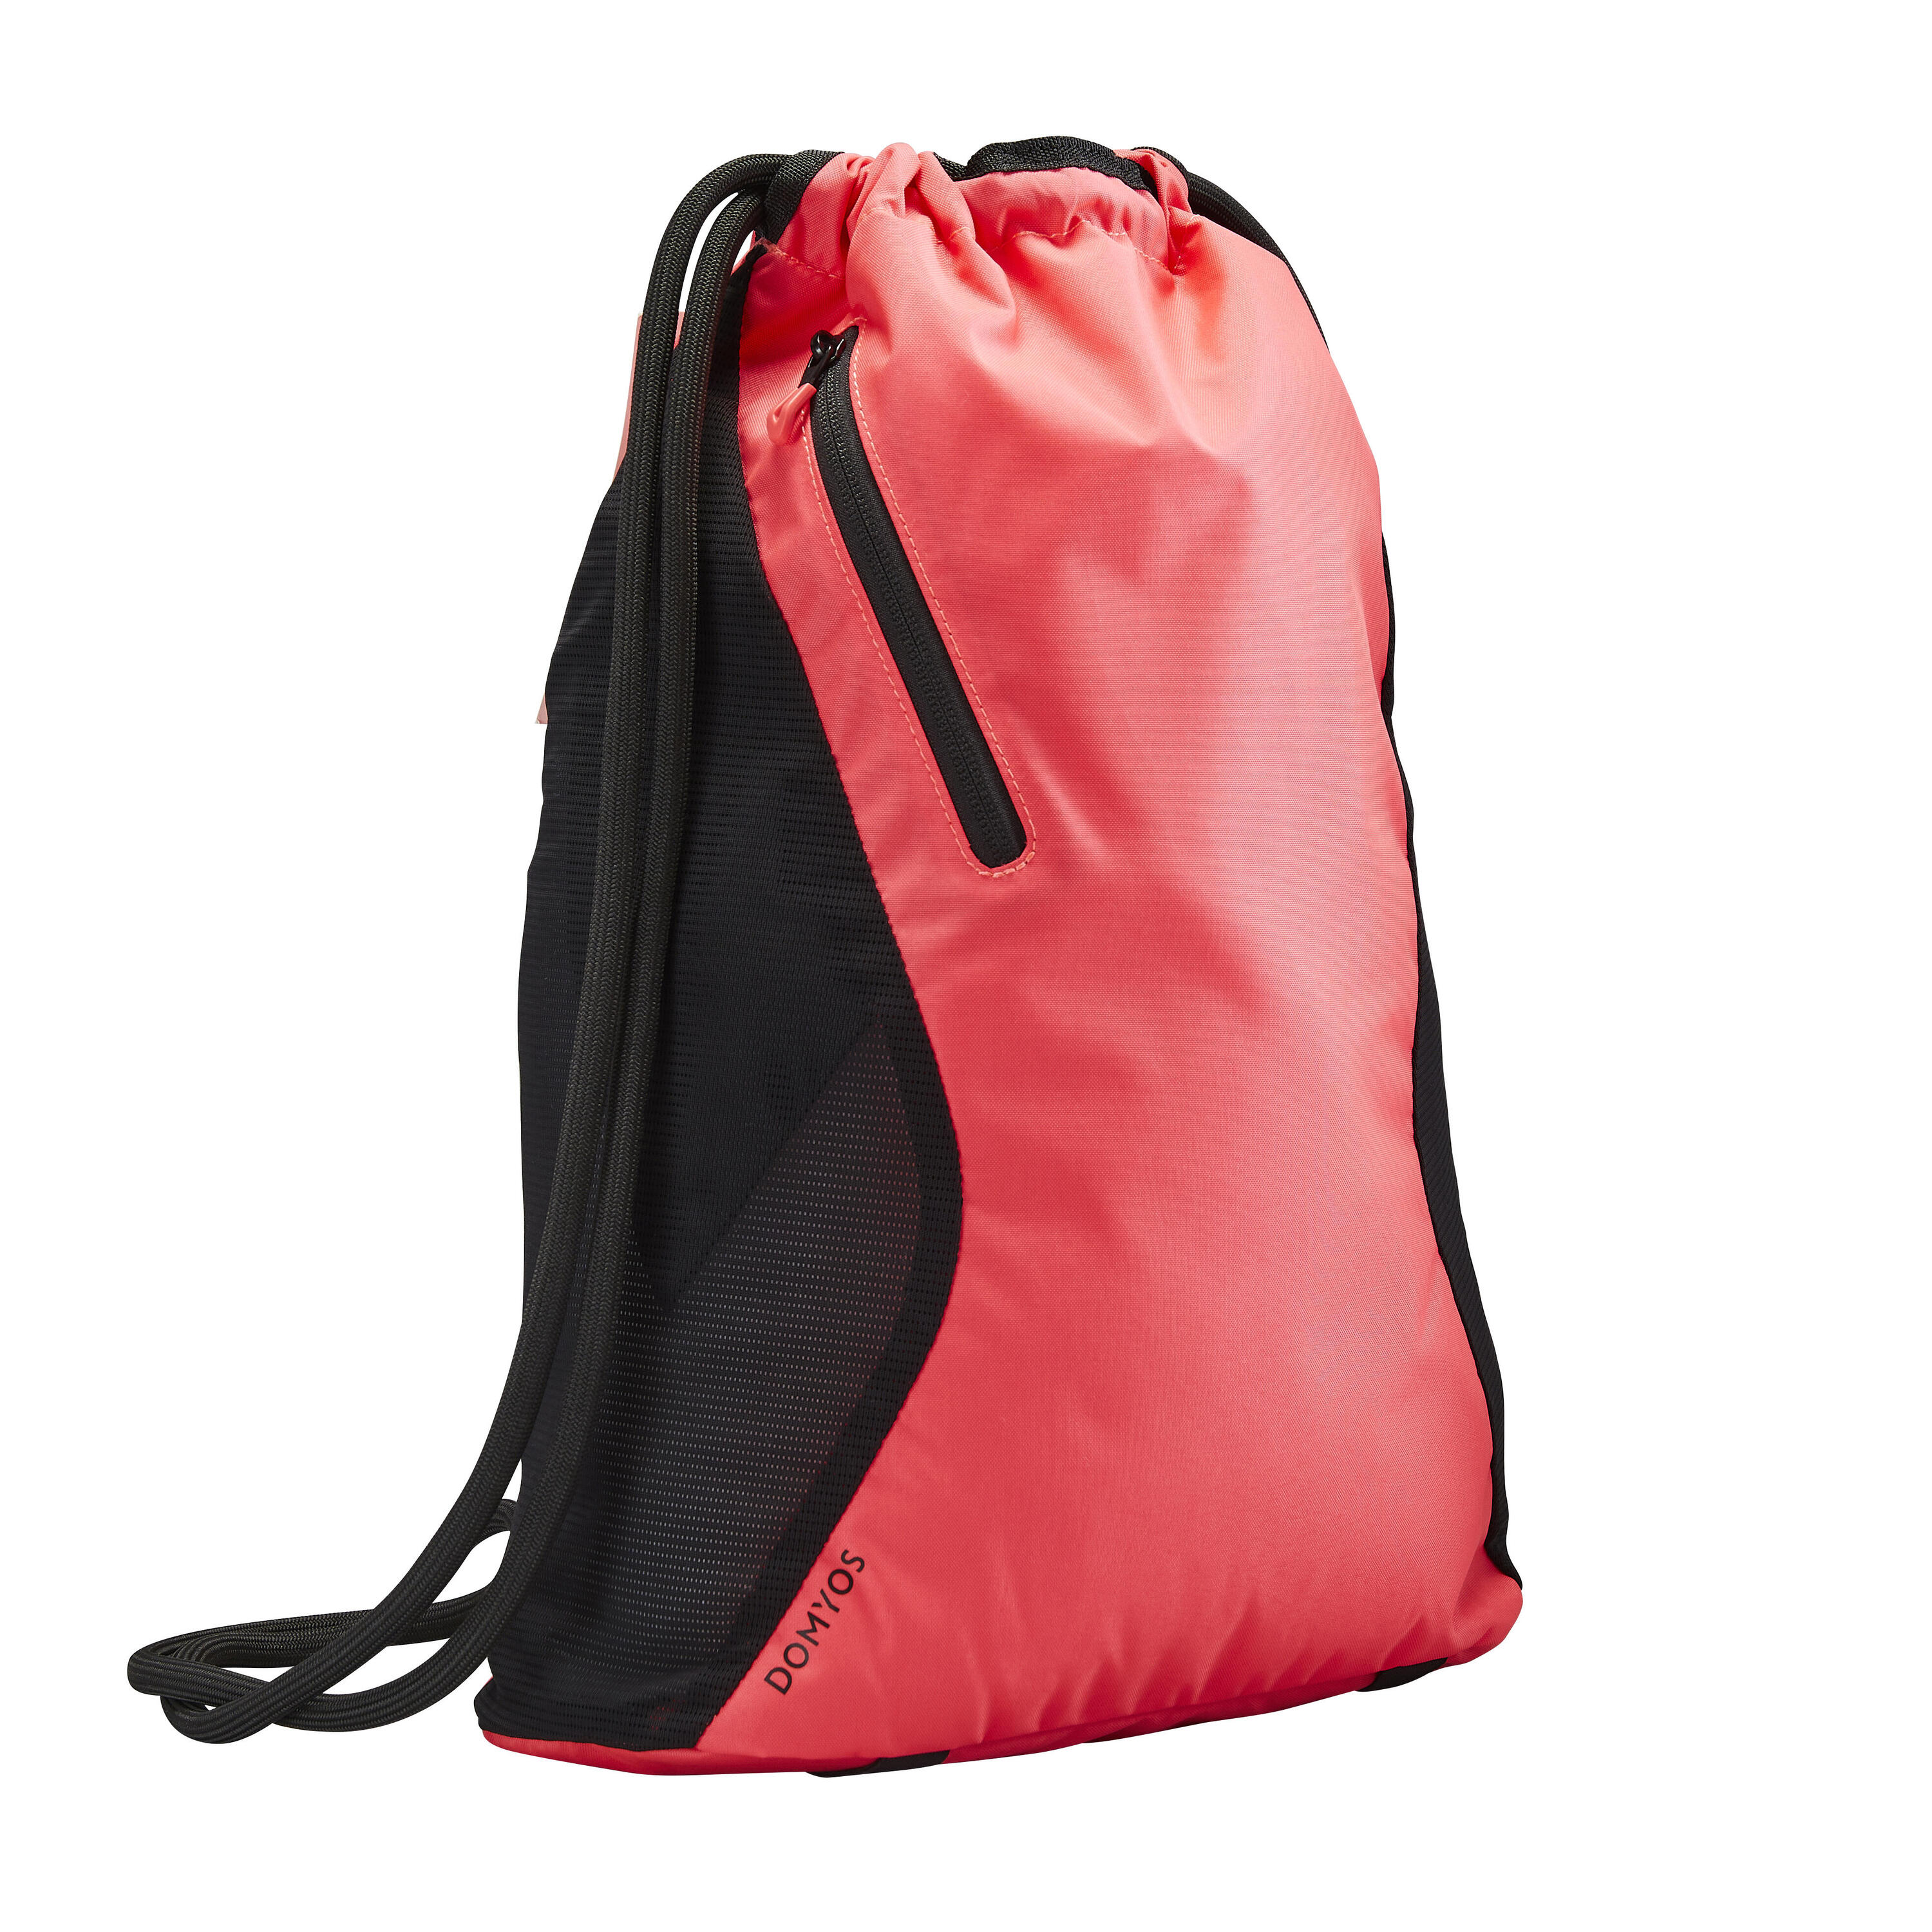 DOMYOS 15L Cardio Training Fitness Backpack - Pink